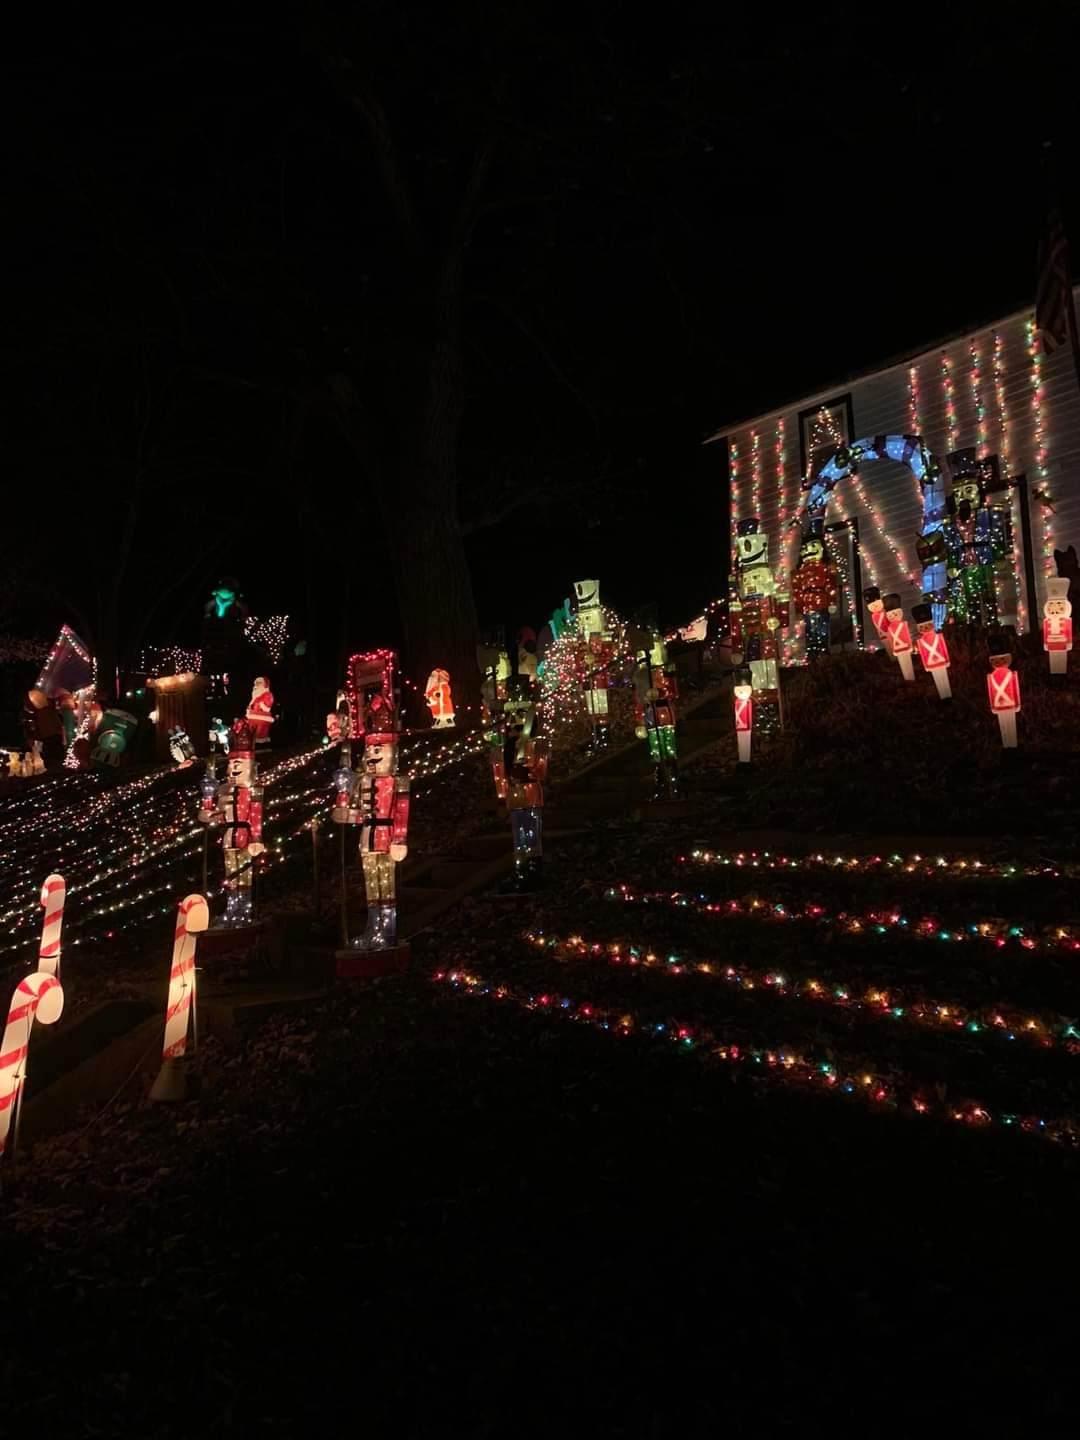 House with Christmas lights and displays in front